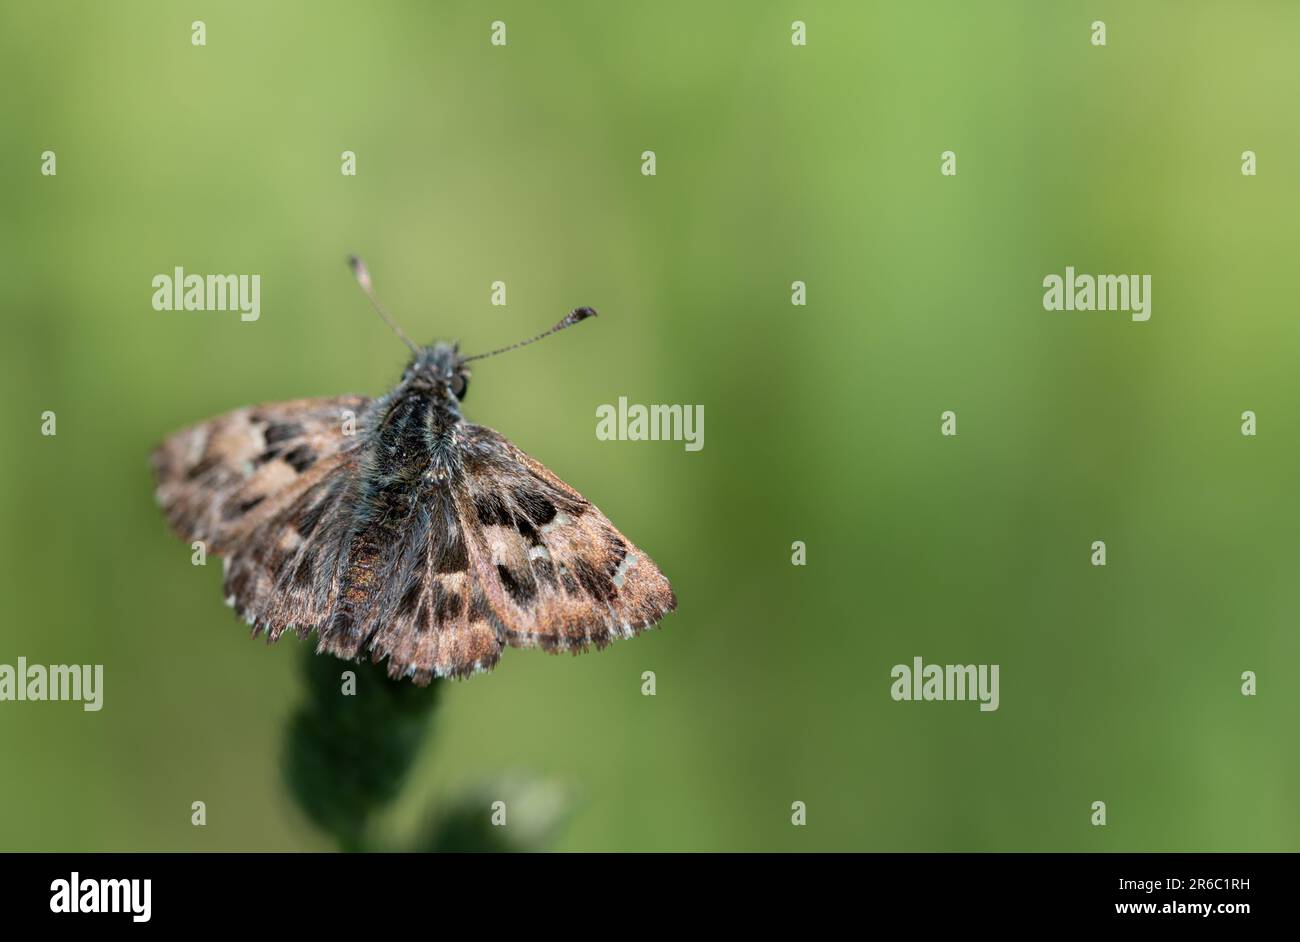 a small brown butterfly, a mallow skipper (Carcharodus alceae), sits on a plant outdoors against a green background. There is space for text Stock Photo